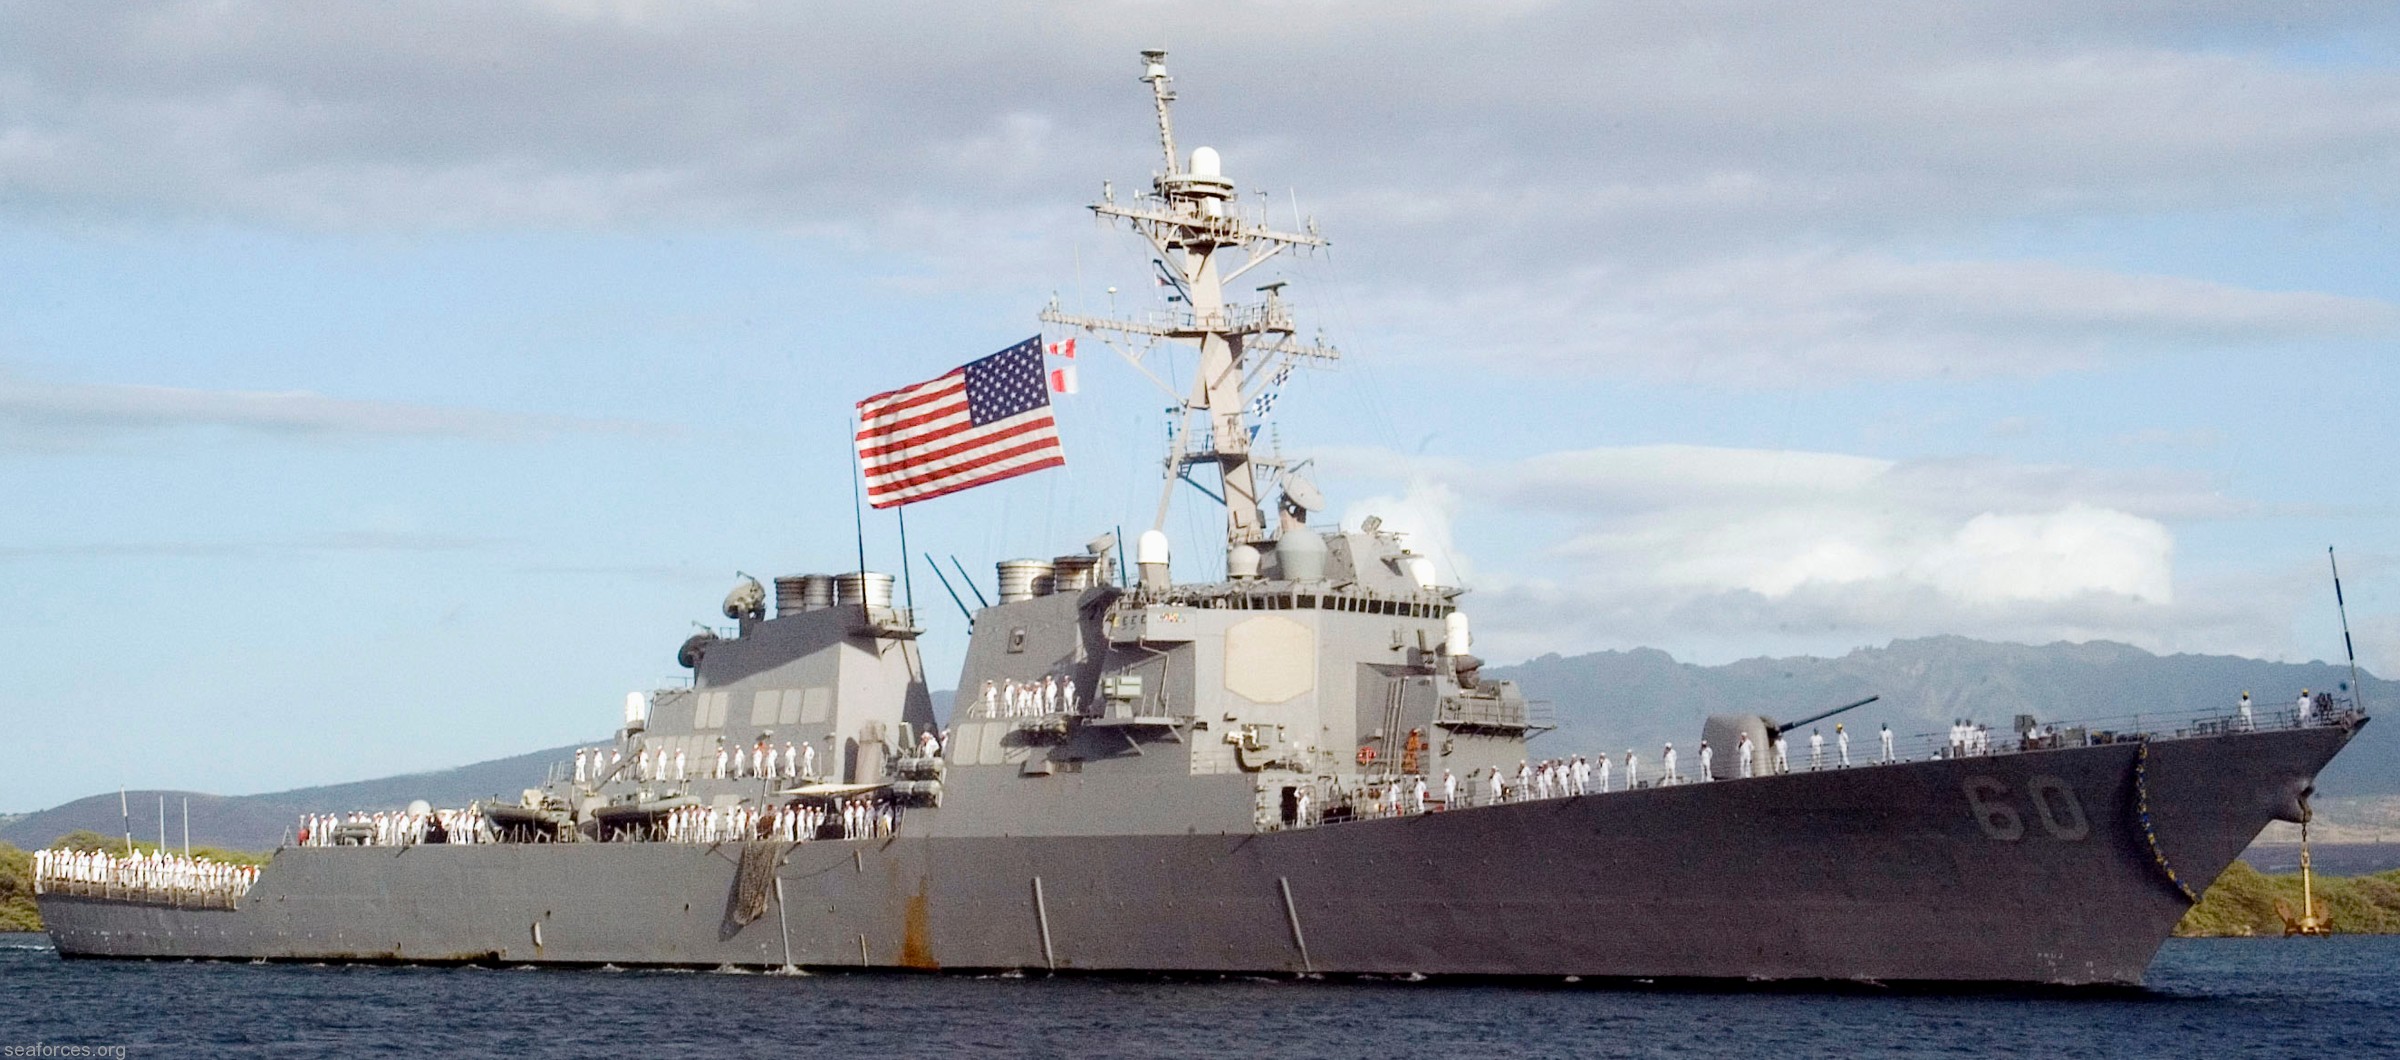 ddg-60 uss paul hamilton guided missile destroyer us navy 32